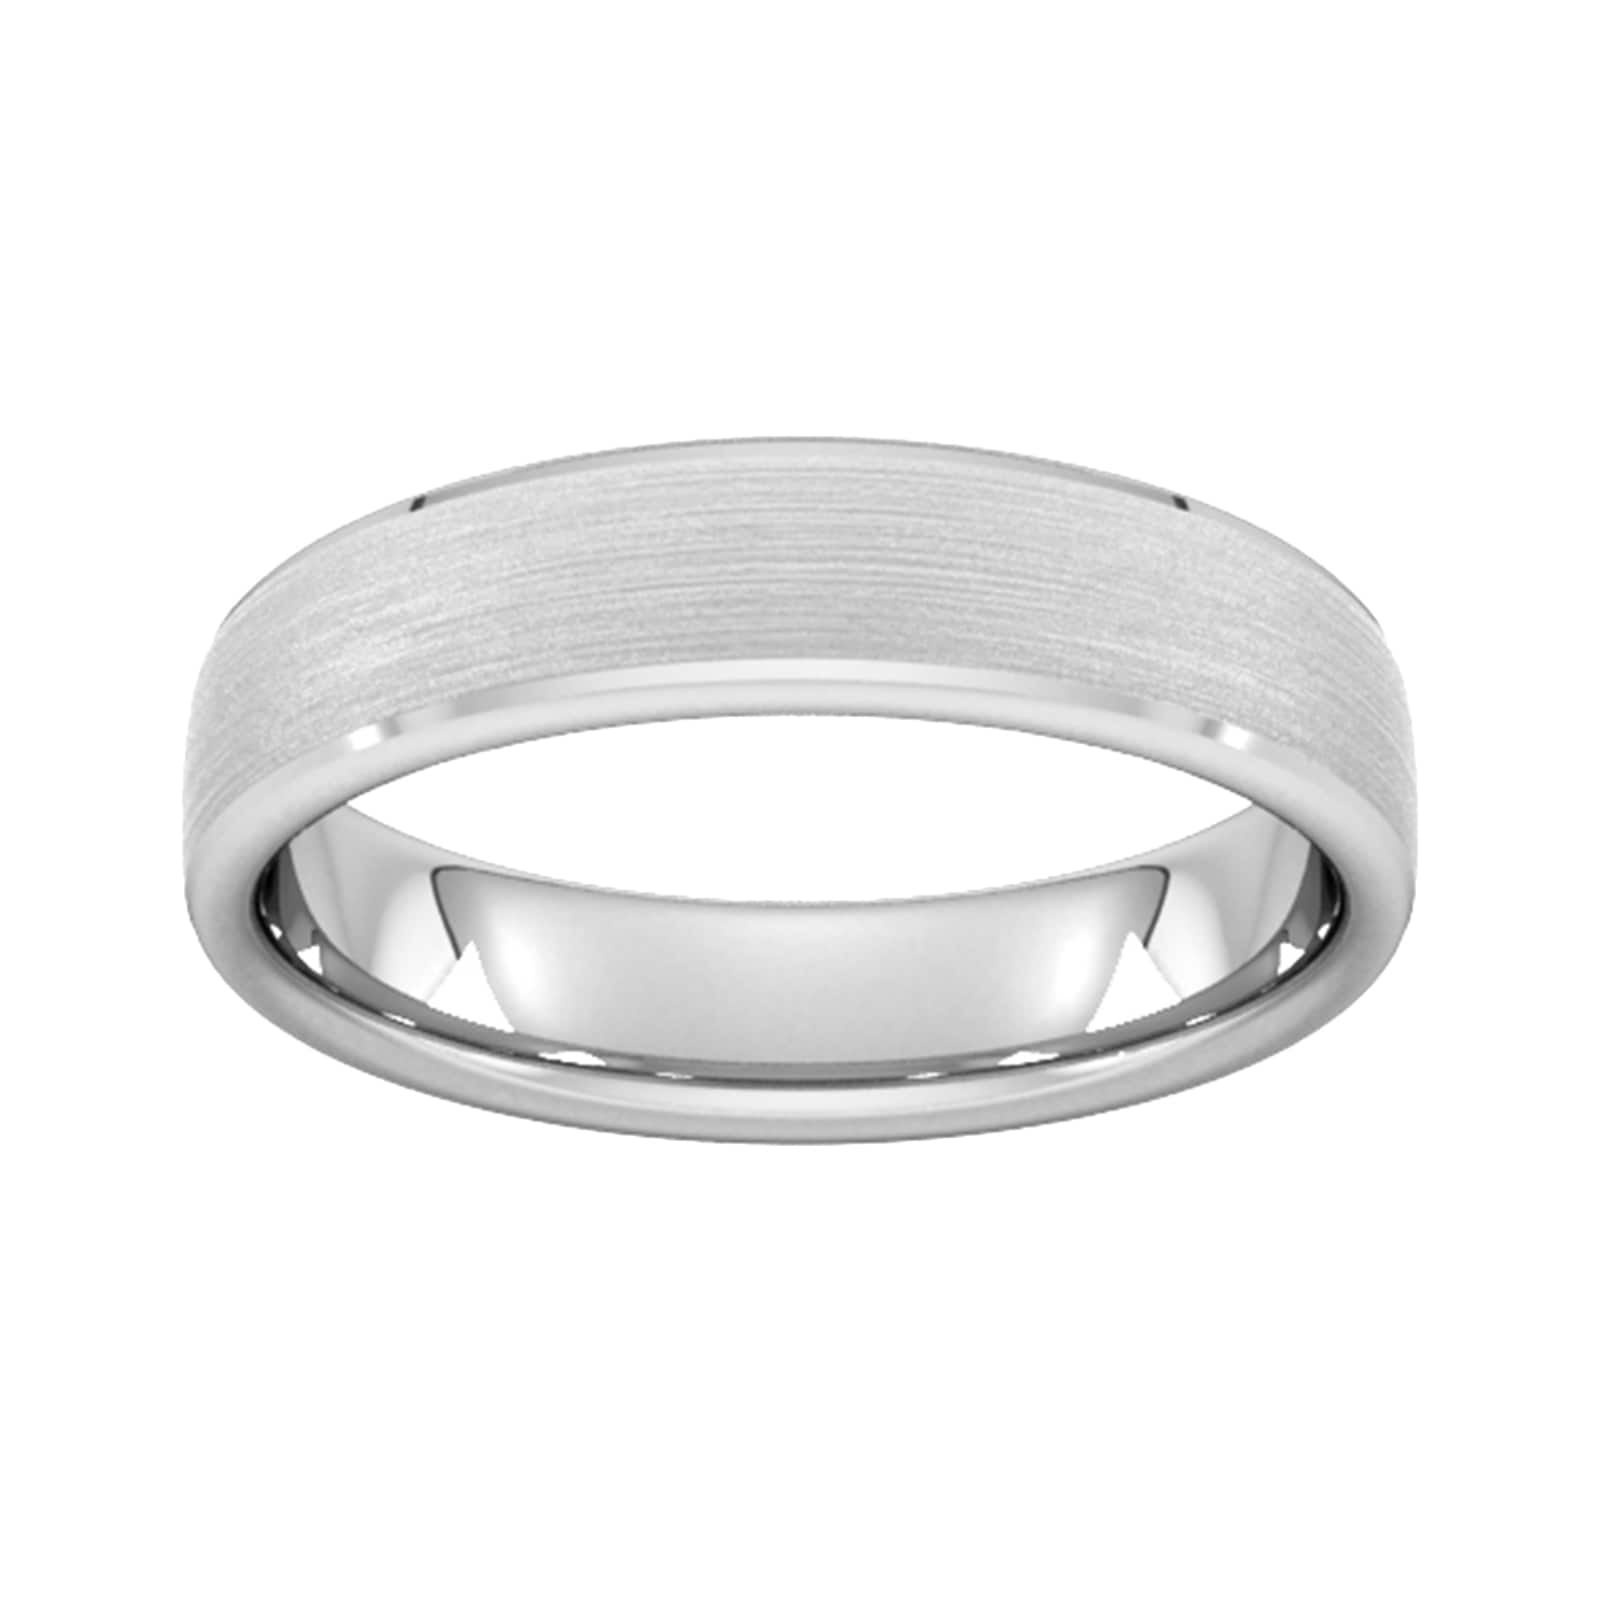 5mm Slight Court Standard Polished Chamfered Edges With Matt Centre Wedding Ring In 18 Carat White Gold - Ring Size Z